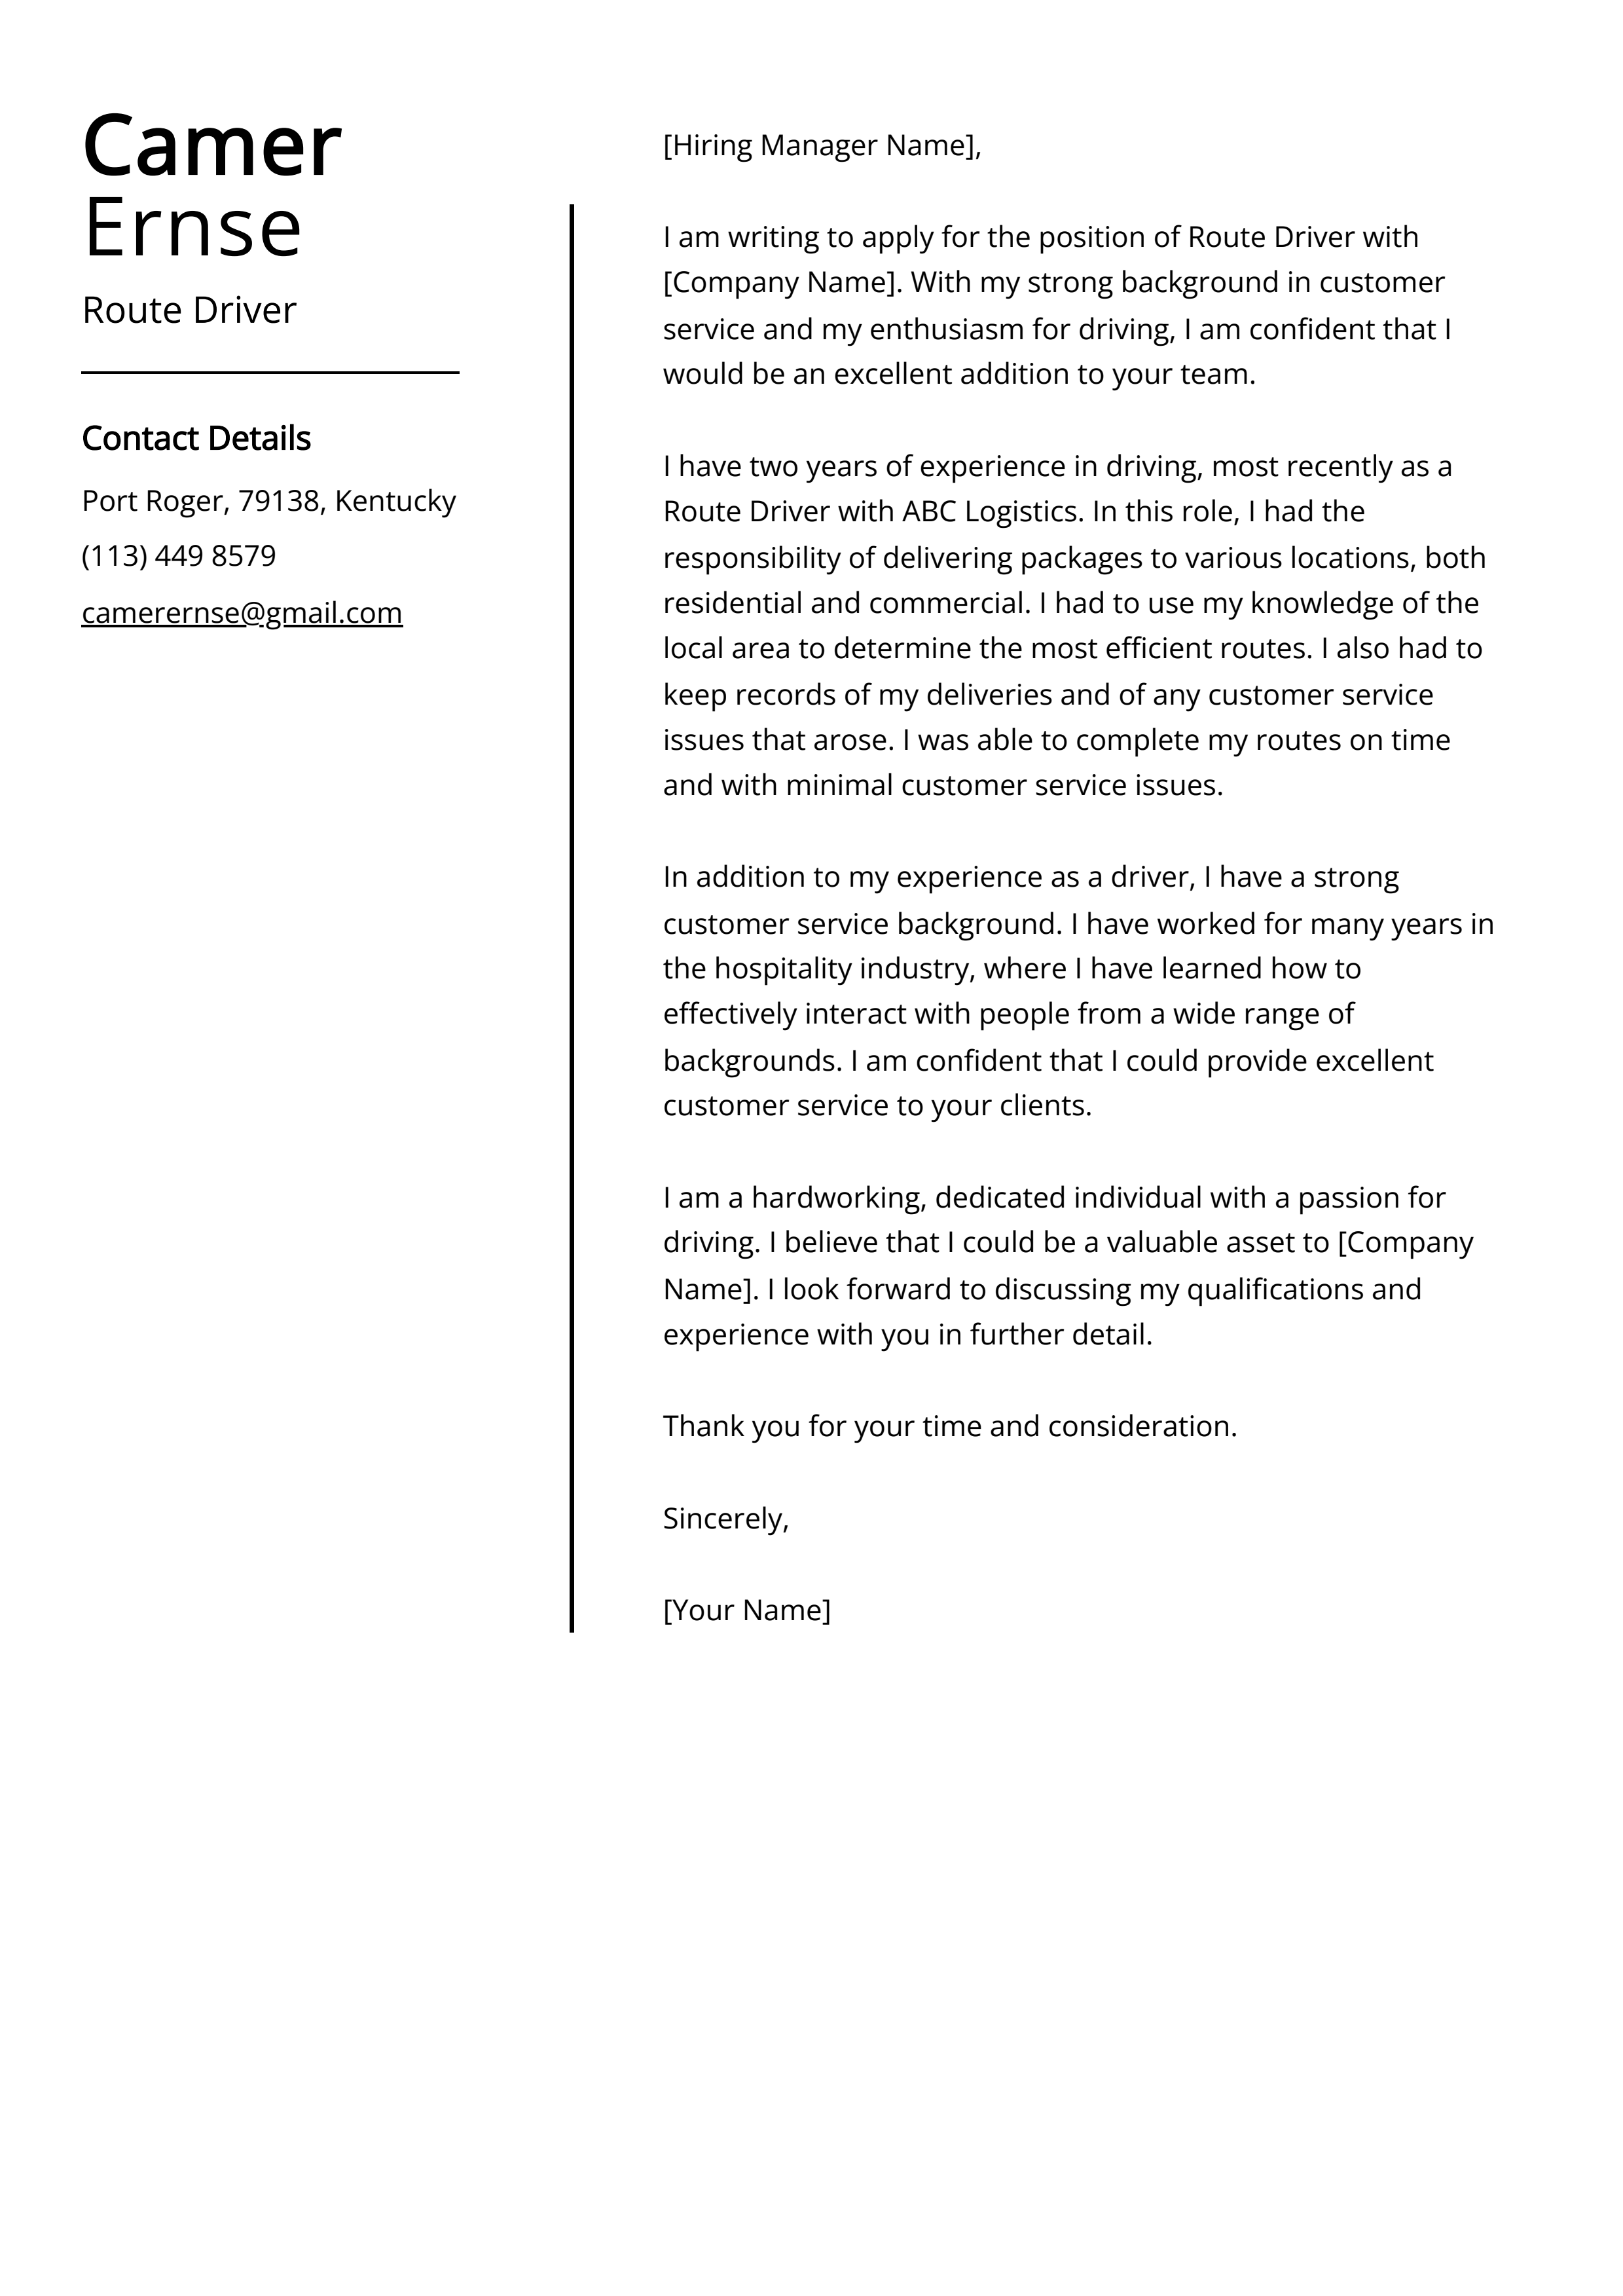 Route Driver Cover Letter Example